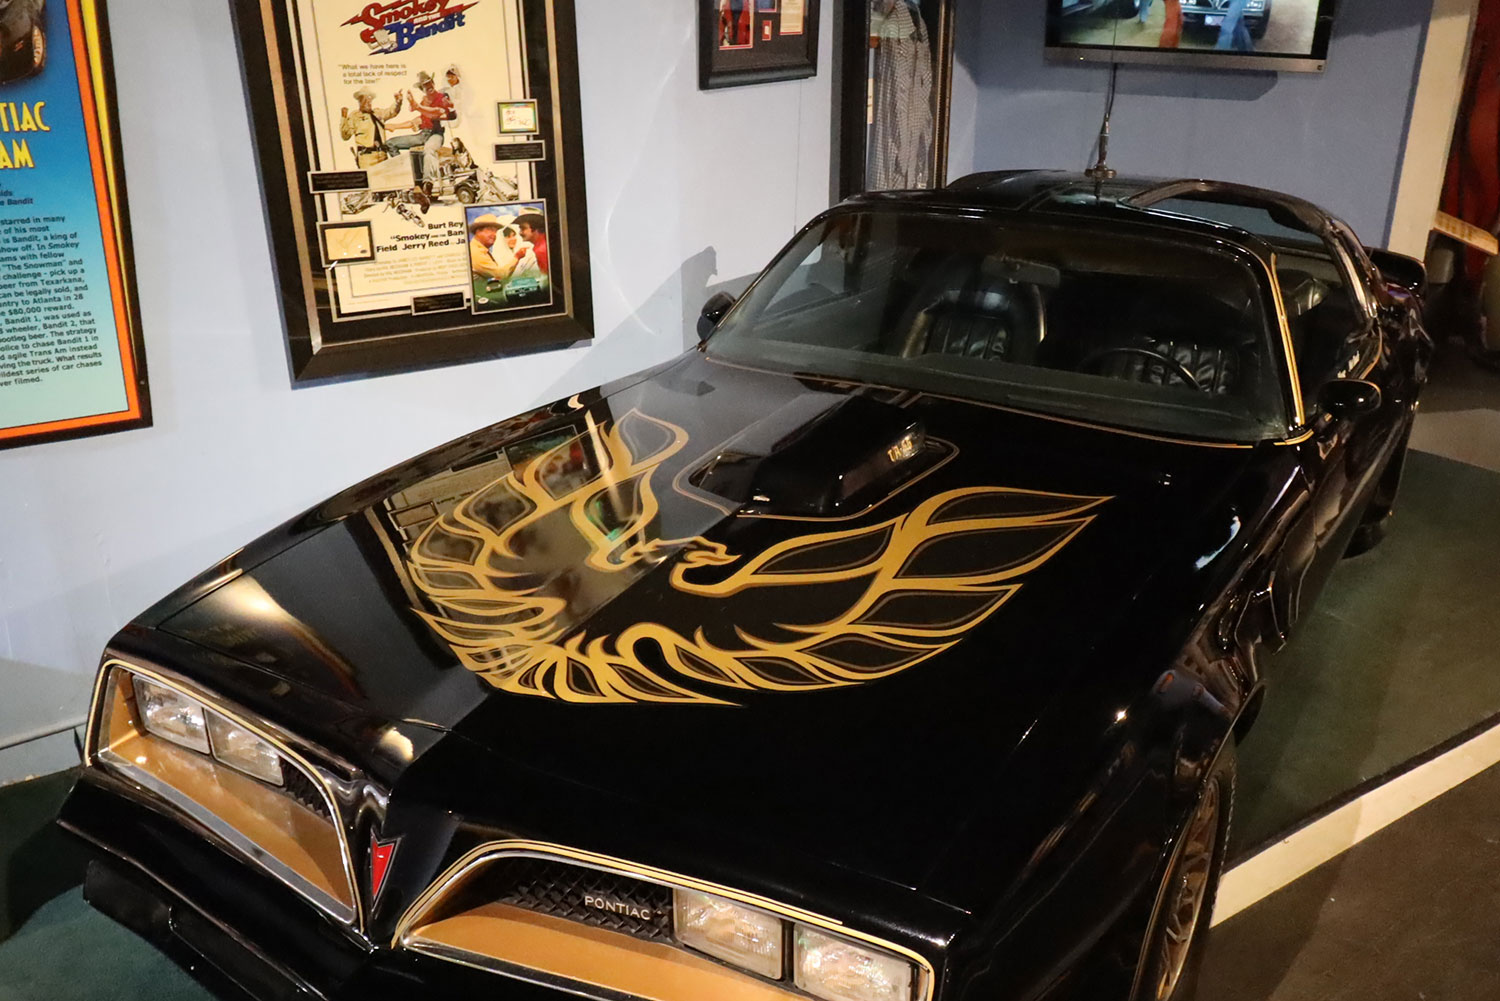 Hollywood Star Cars Museum – Gatlinburg Attraction Review